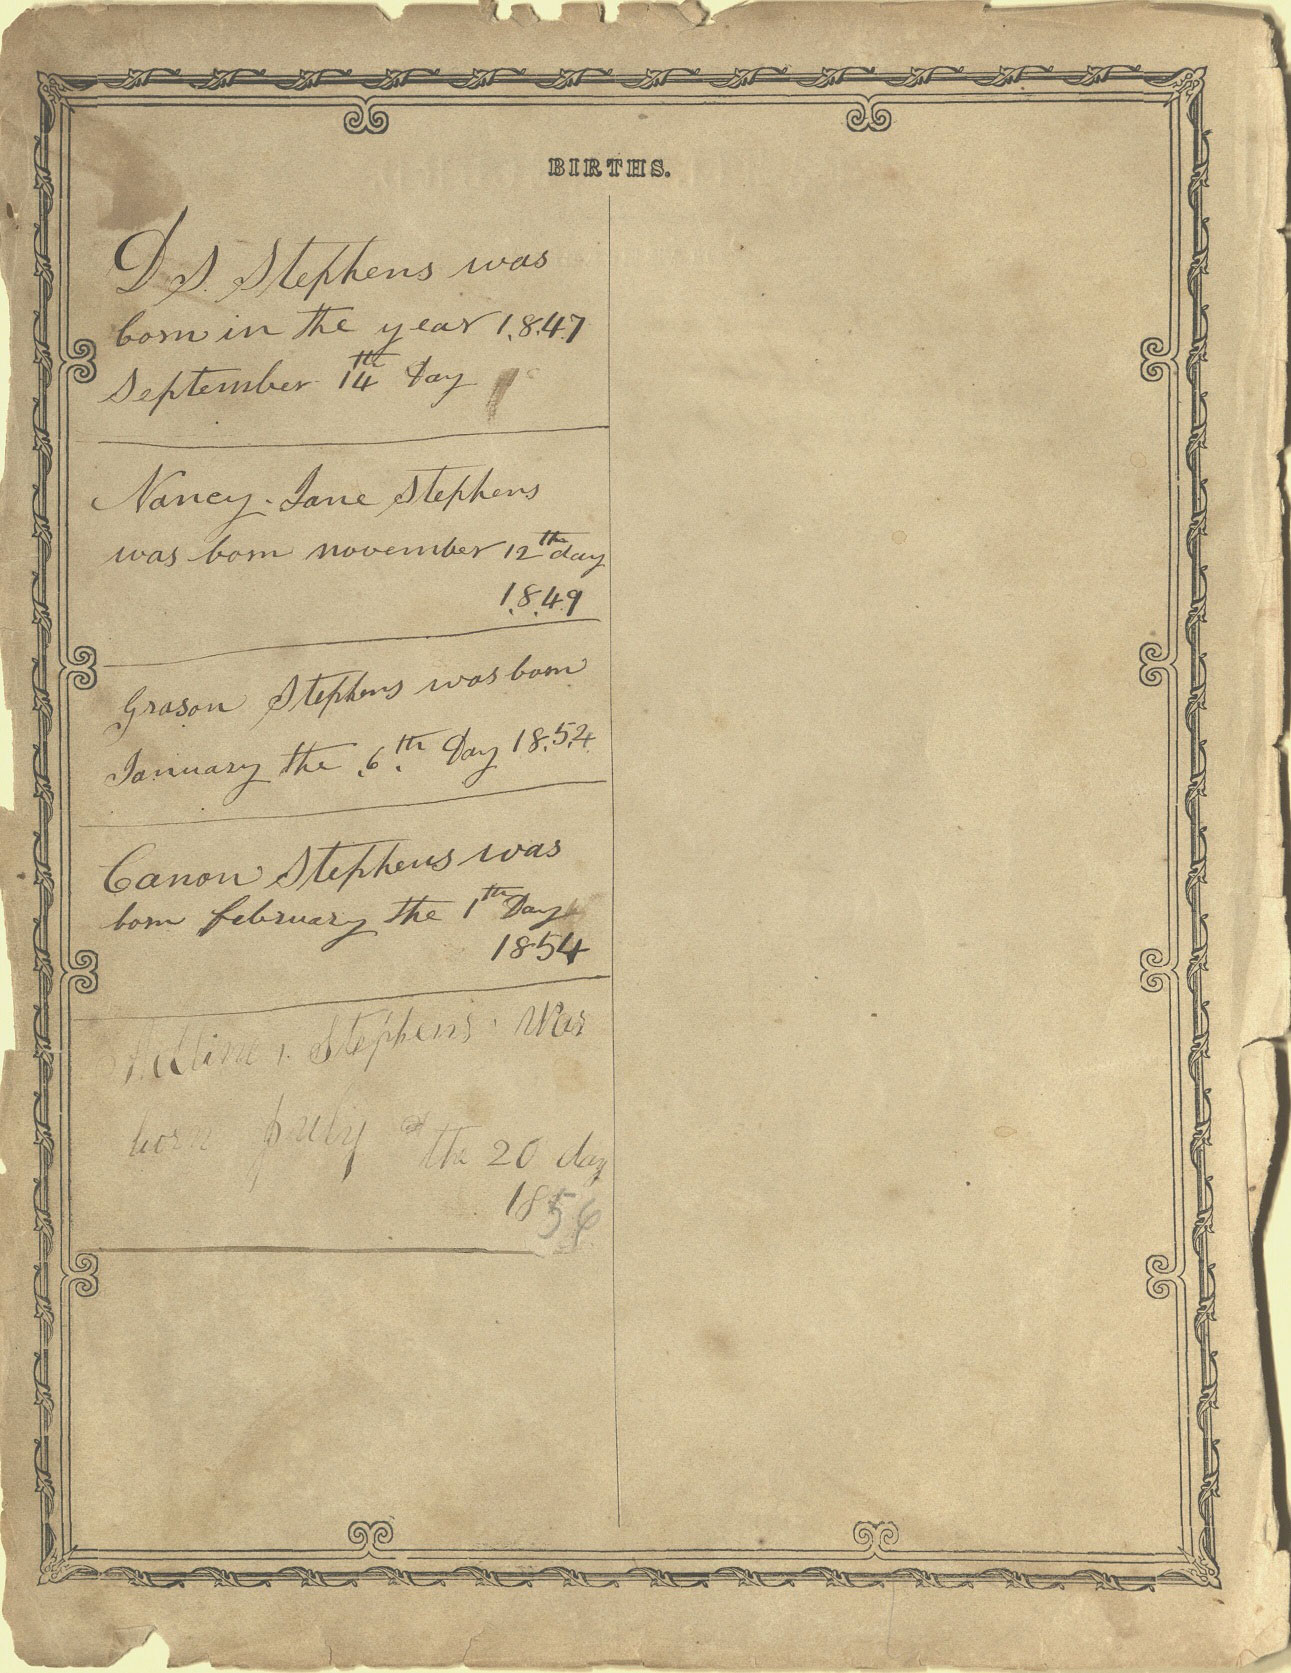 Genealogical records found in Hannah Coker's family Bible